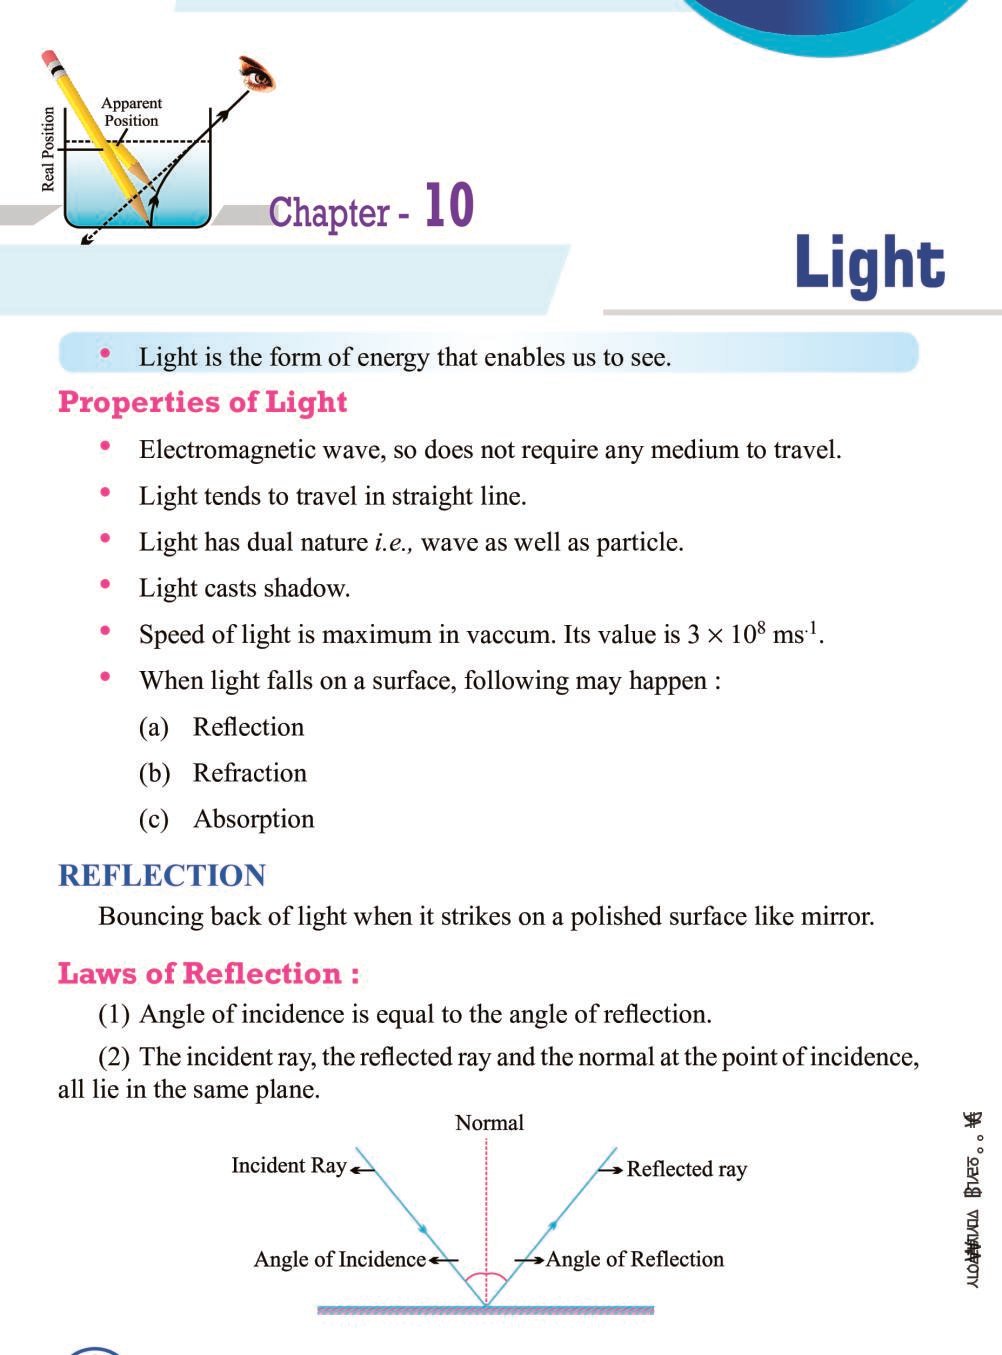 Class 10 Science Notes for Light- Reflection and Refraction